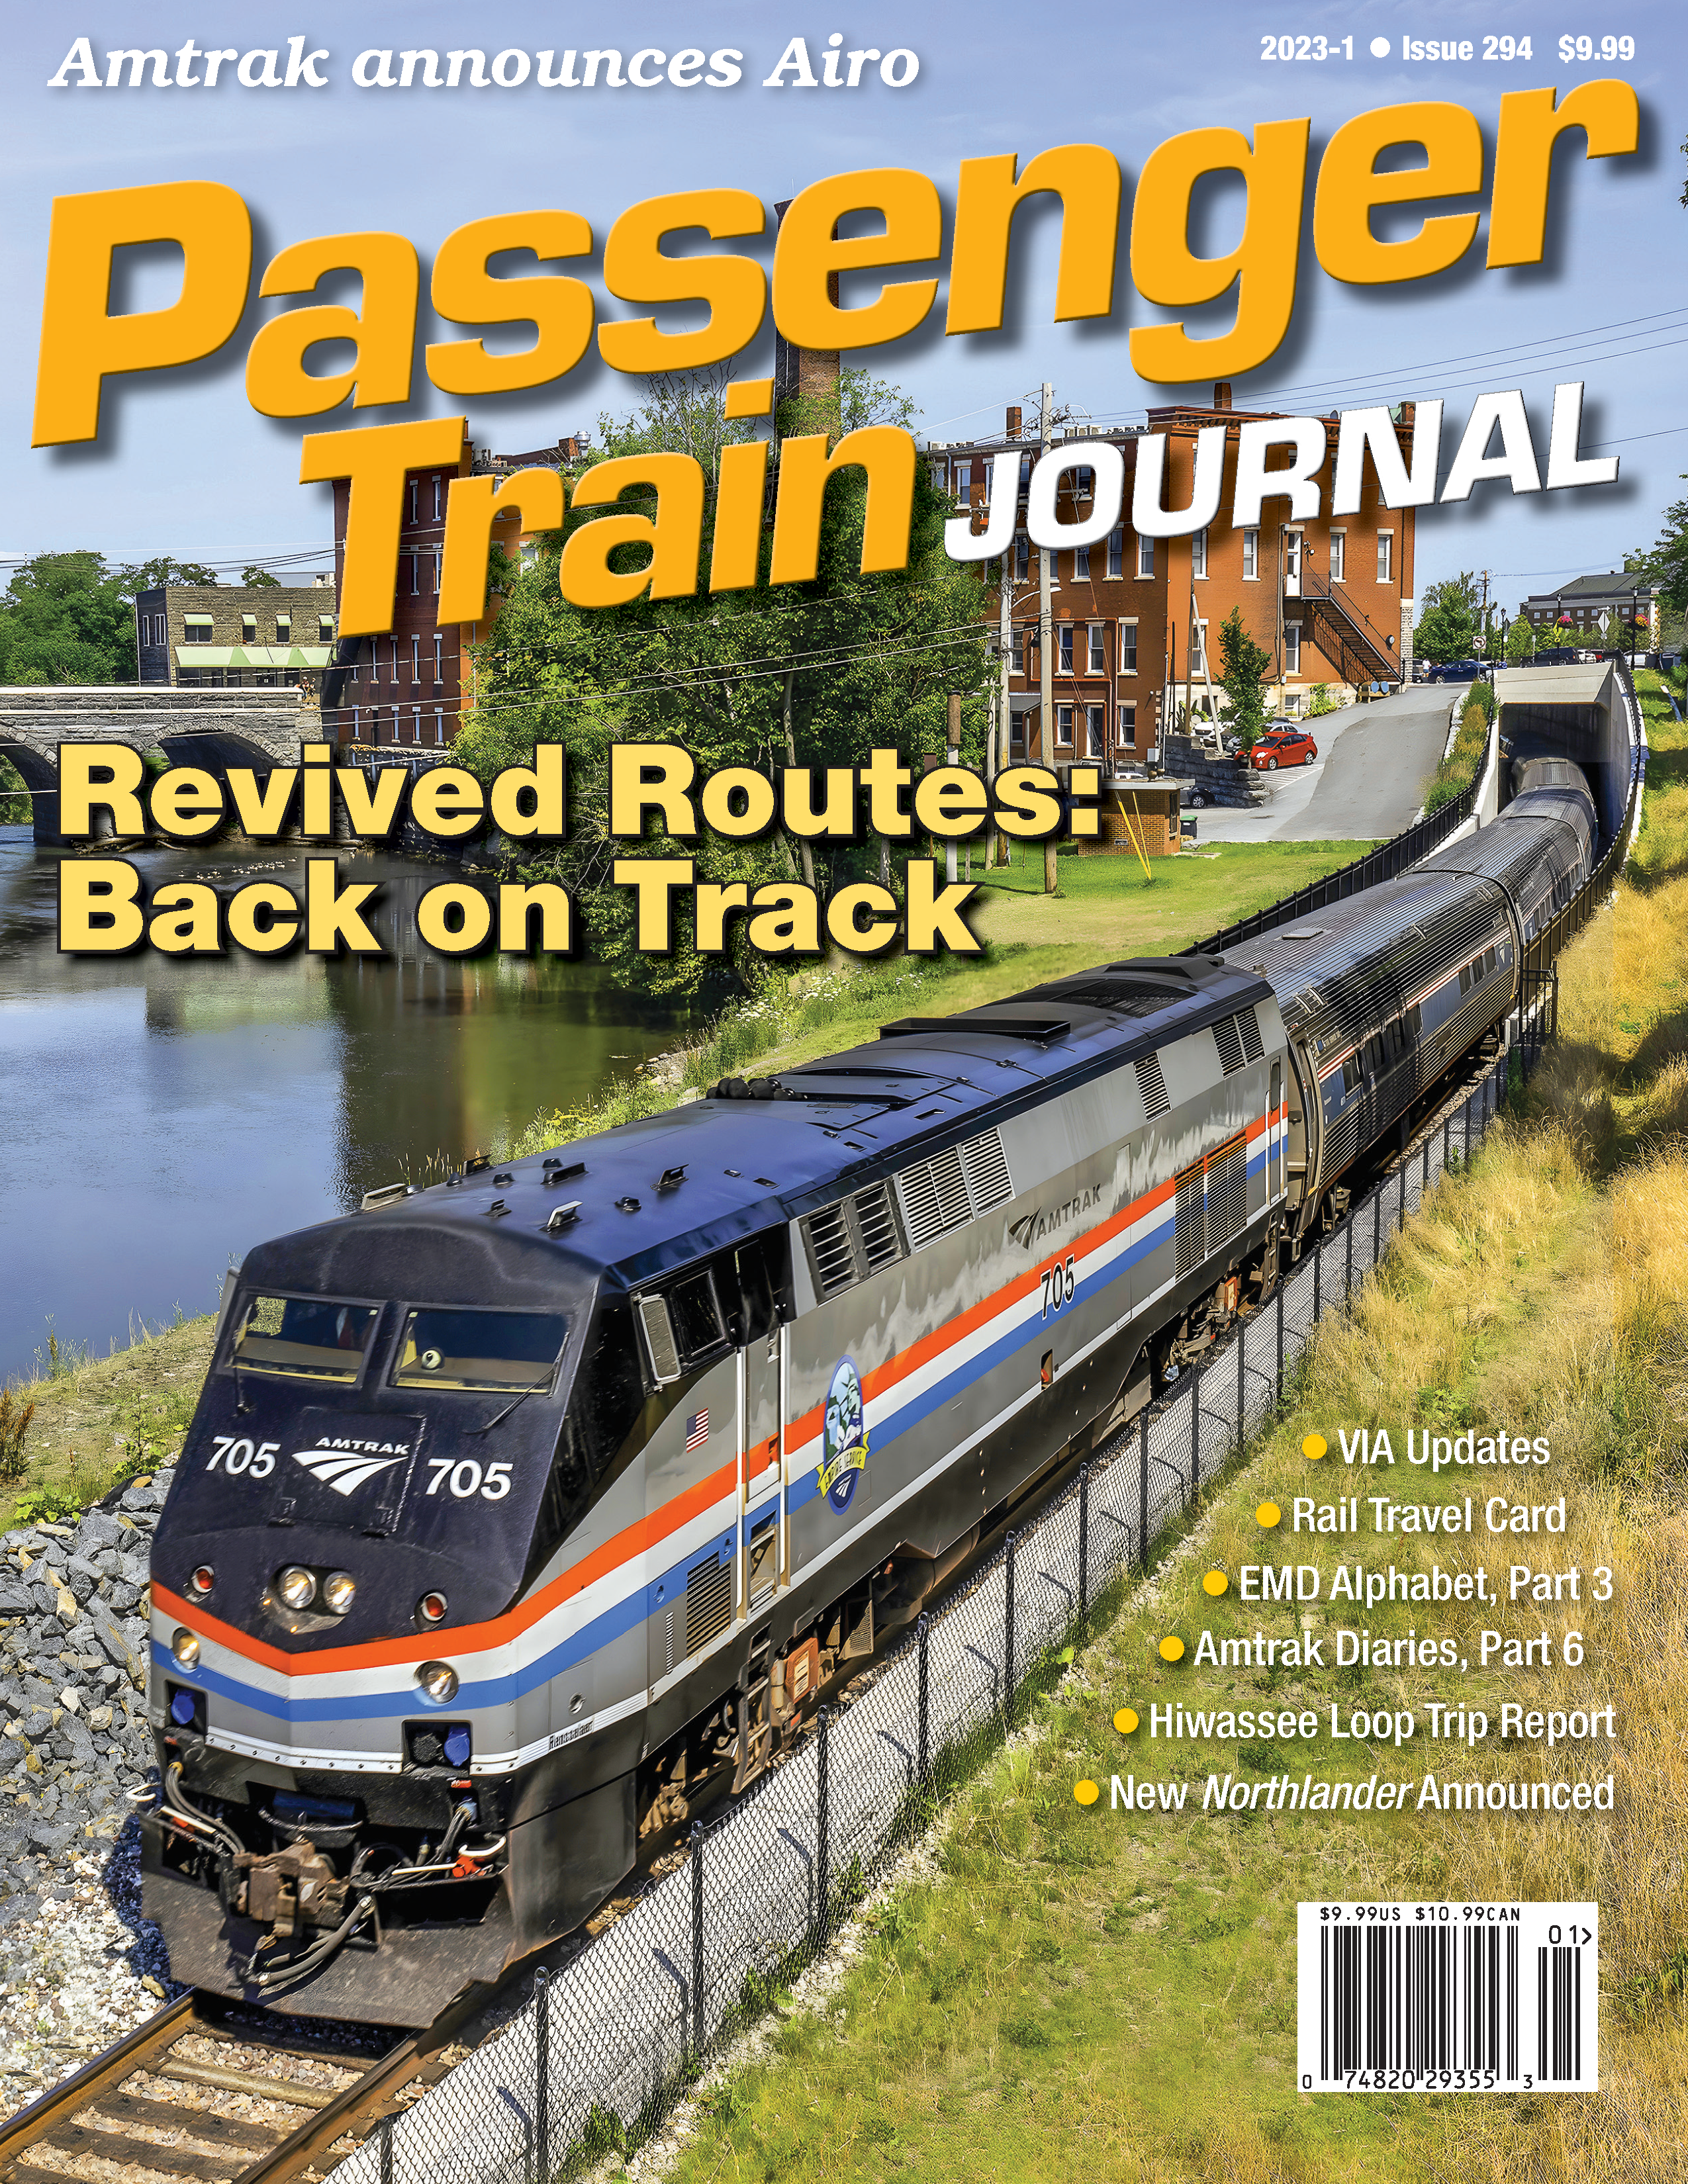 Coach Trains and Travel - 1st Edition/1st Printing